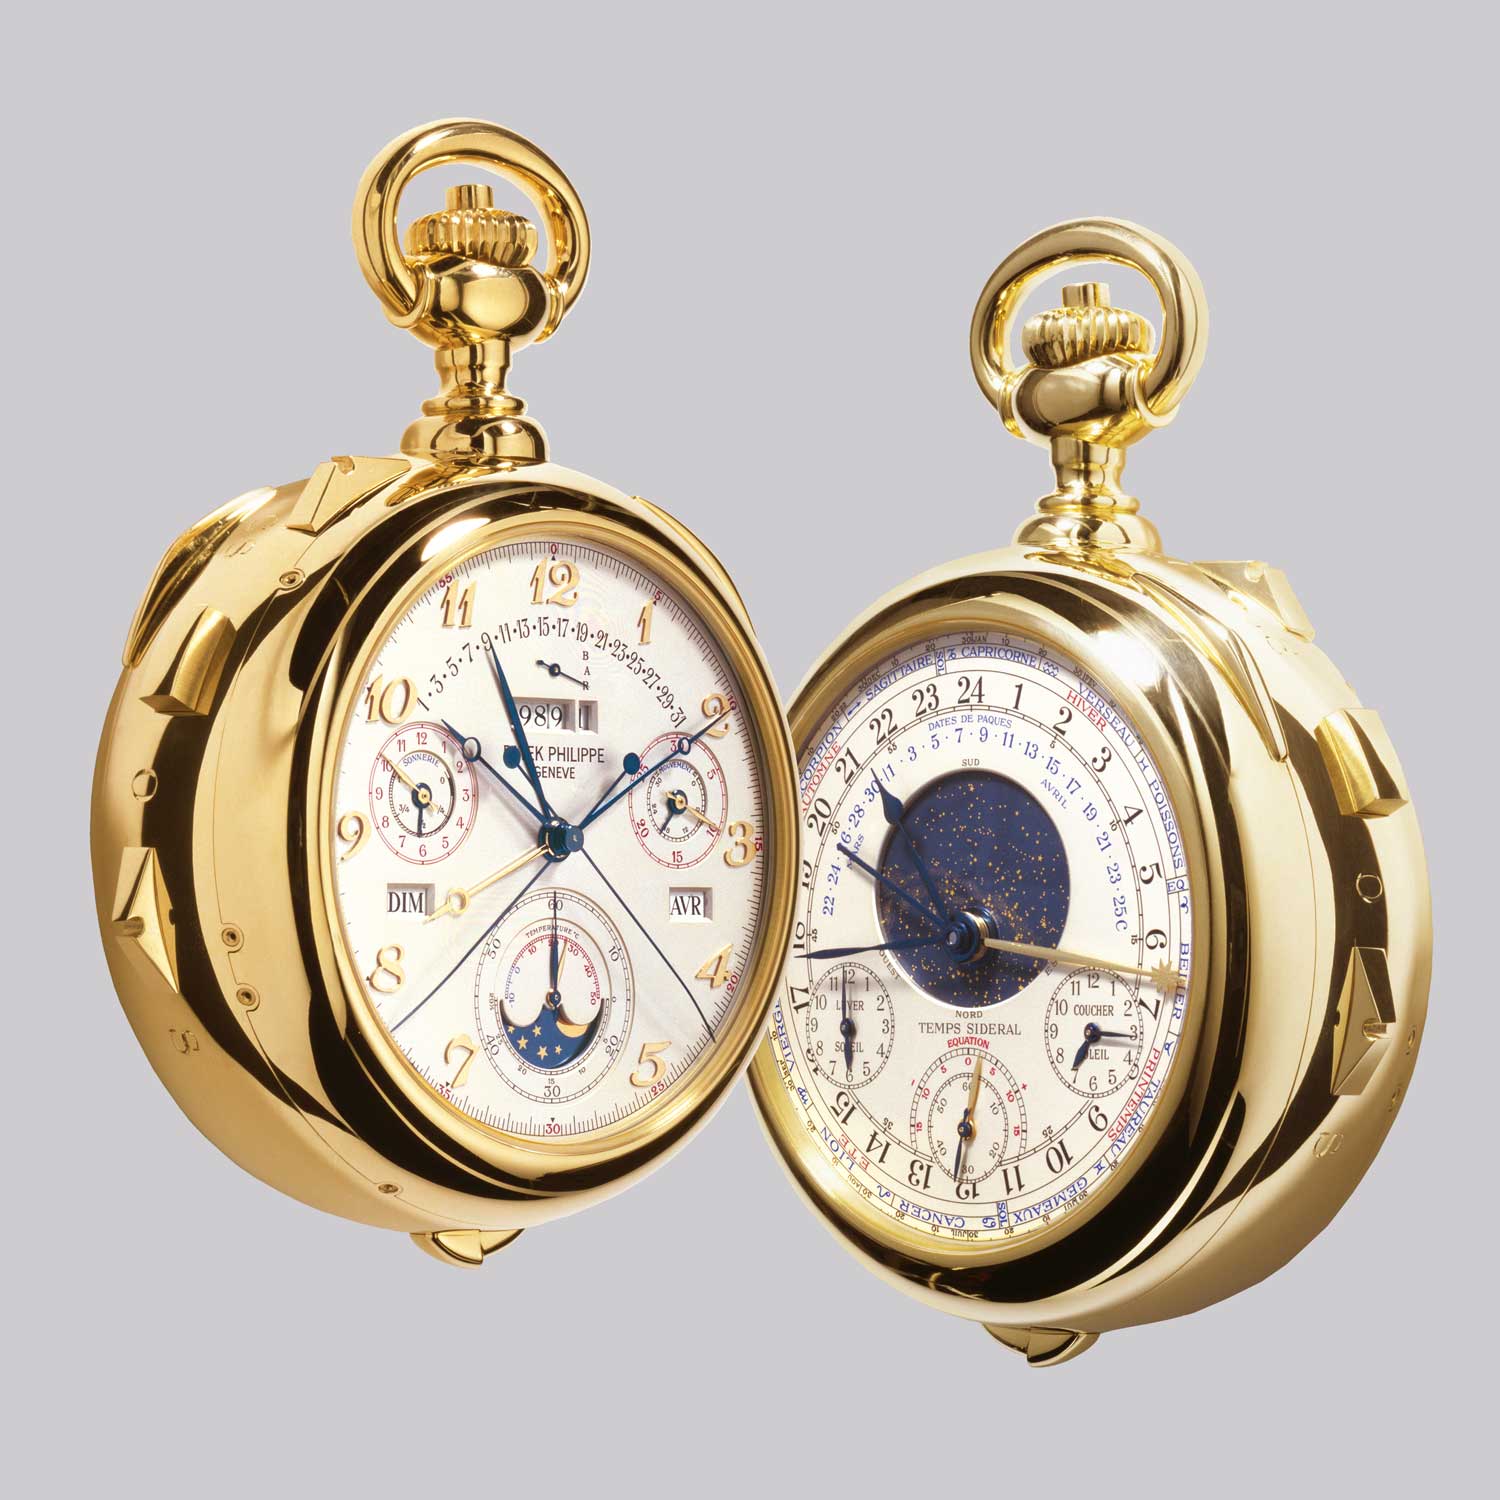 The back of the Caliber 89 shows a sidereal dial with the equation of time displayed on a penannular scale at six o’clock, the hours and minutes of sunrise and sunset at eight and six o’clock respectively and the date of Easter right above the star chart; Displayed on the front is the rattrapante chronograph, the full secular perpetual calendar showing the year in an aperture and the retrograde date indication right above it, the age and phases of the moon and a second time zone